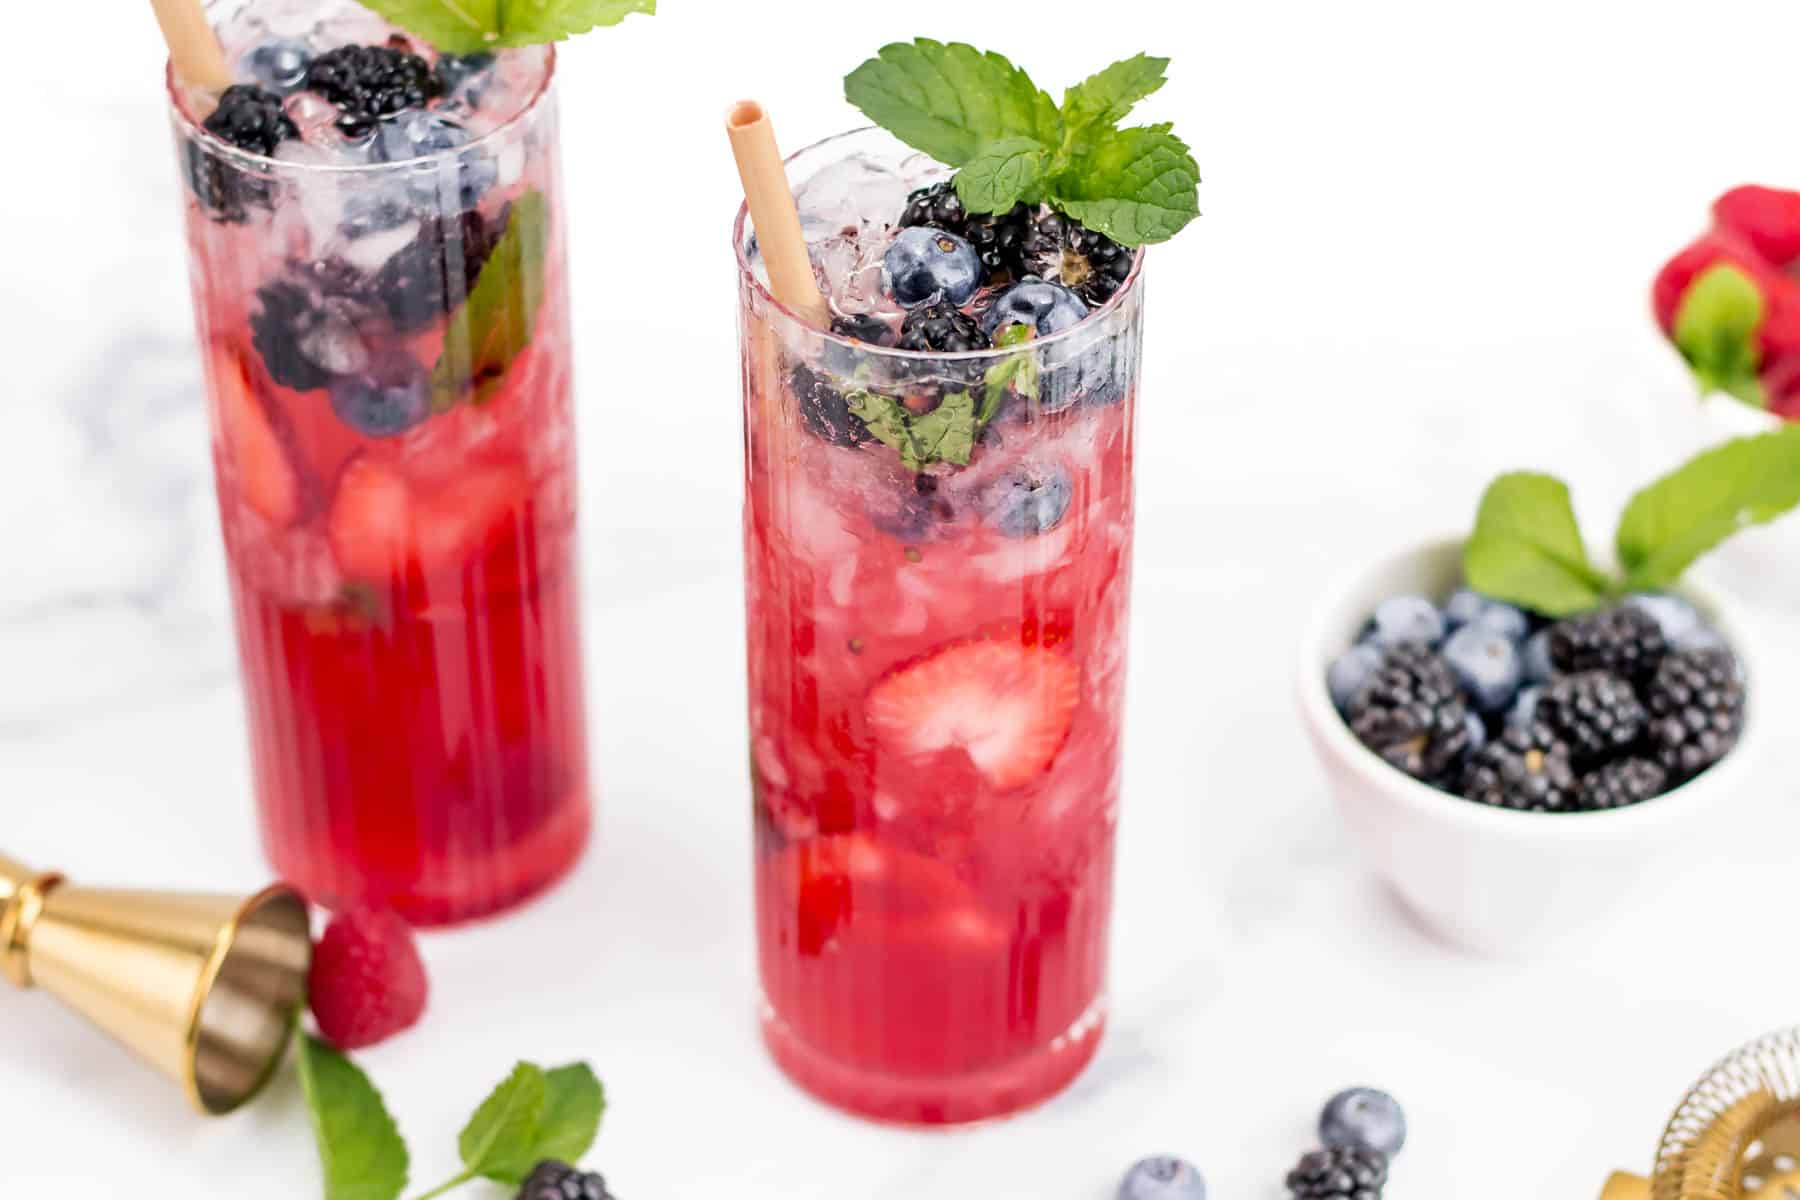 Two tall glasses of berry-infused red drink garnished with mint leaves and fresh berries. A bowl of berries, a measuring jigger, and loose berries are placed around the glasses on a white surface.